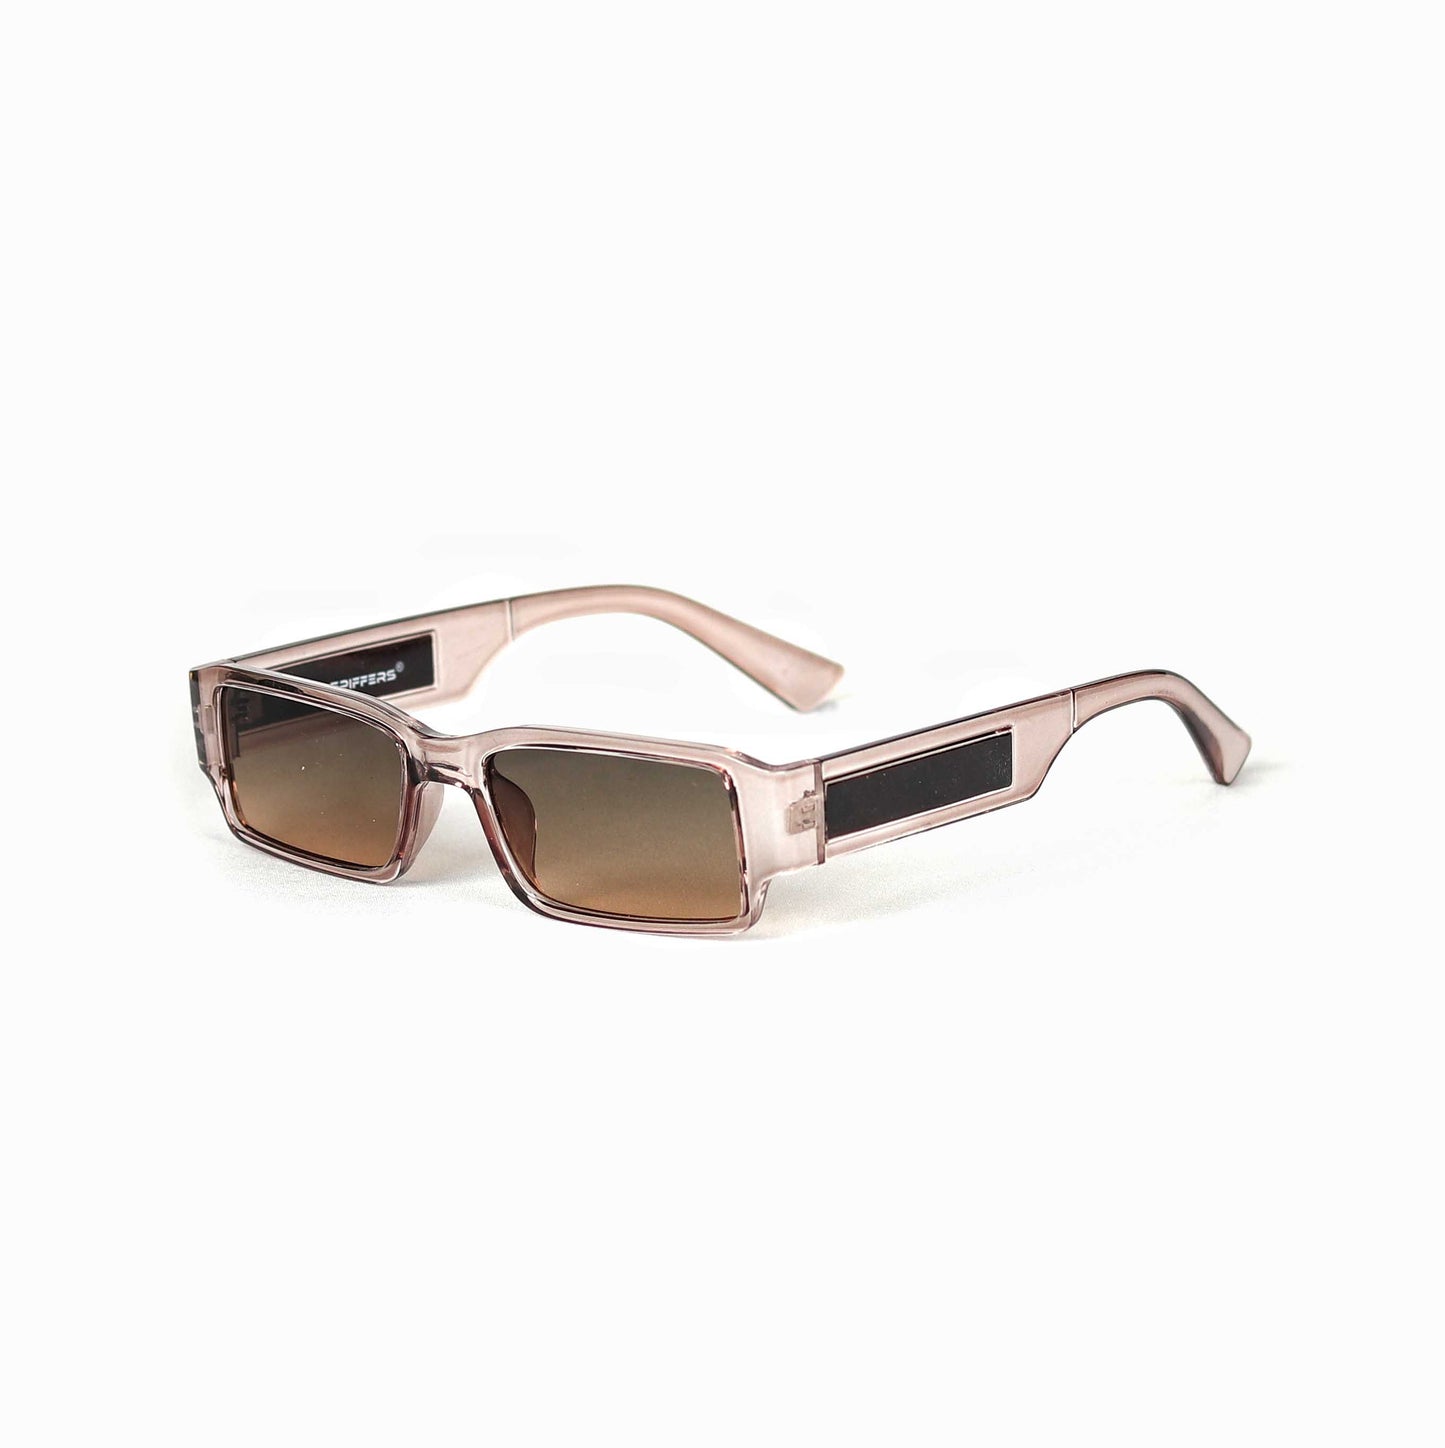 Espiars Rectangle PC shades (brown)